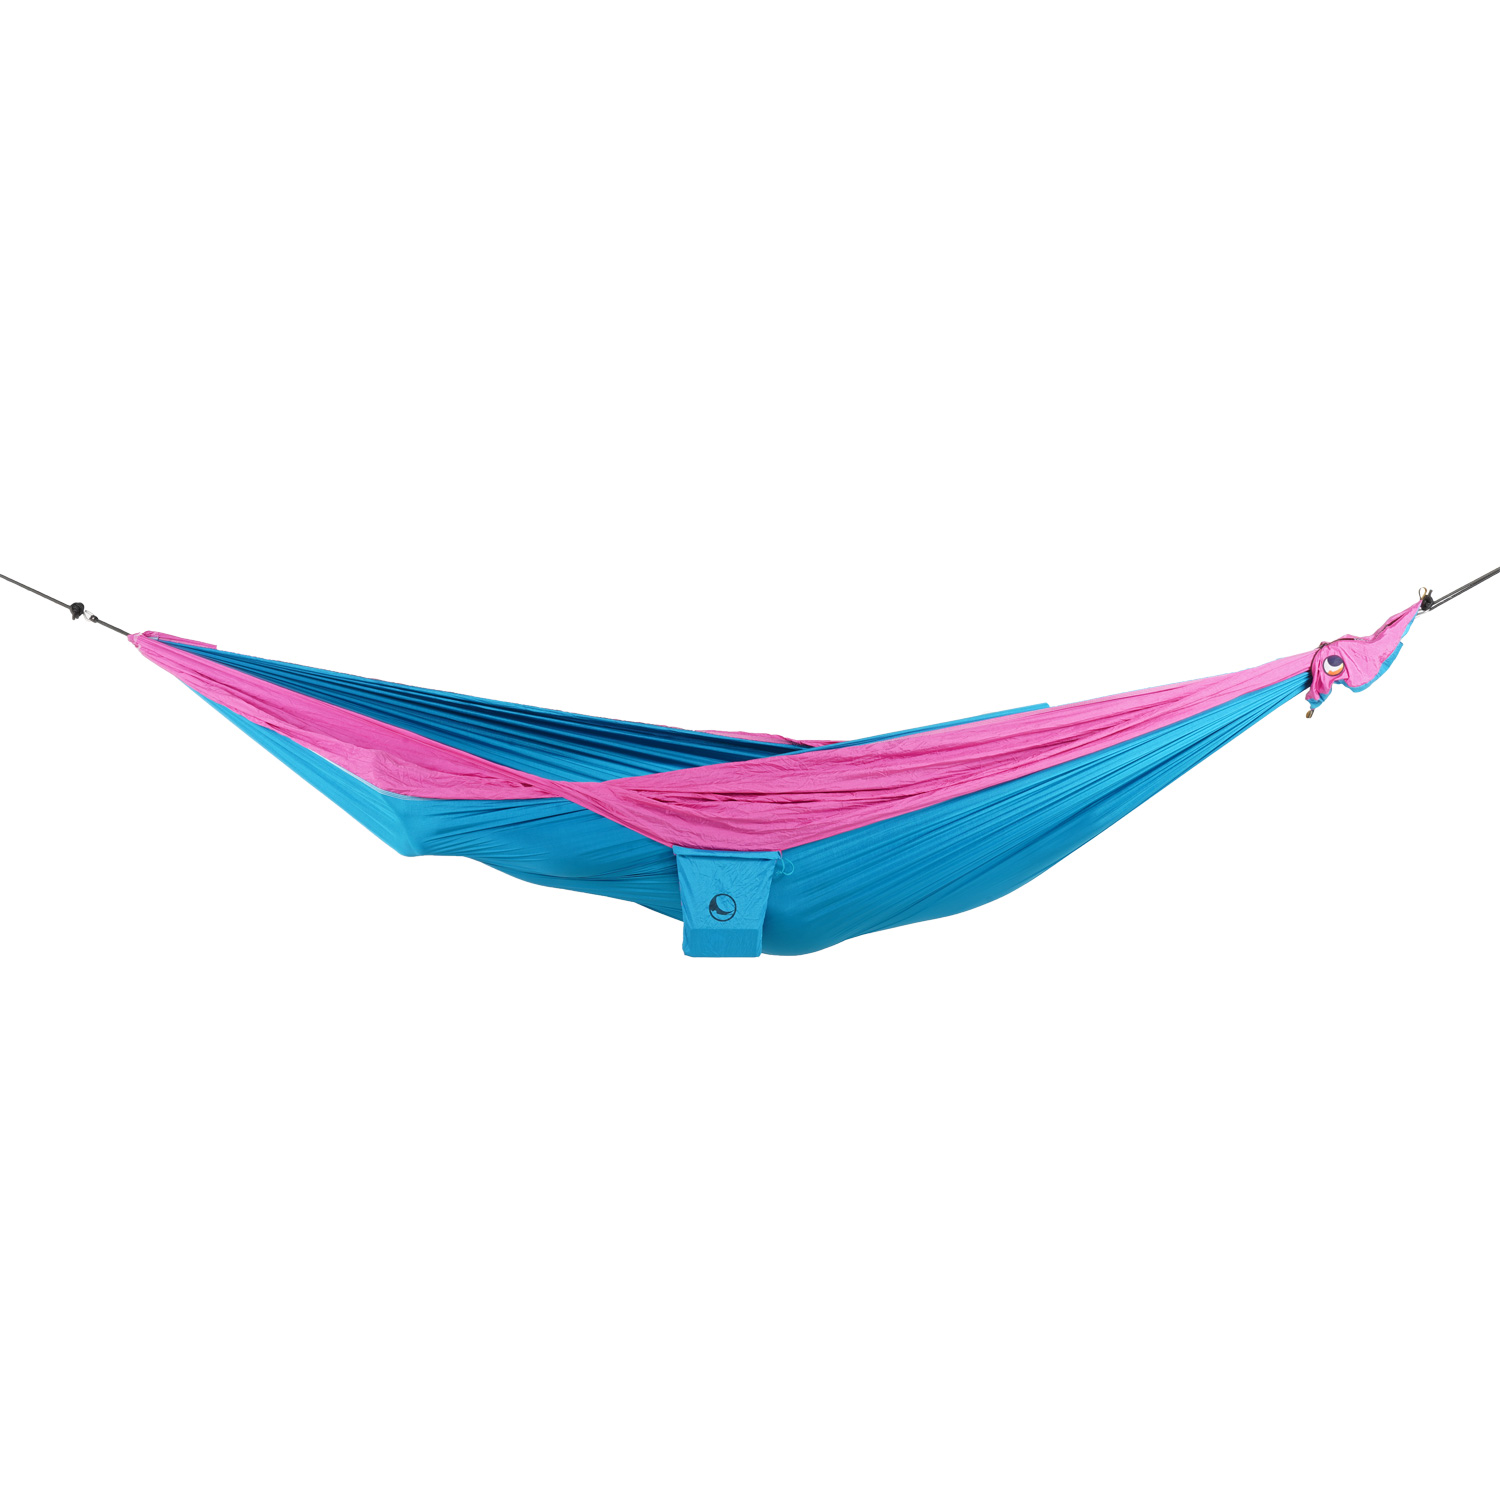 Picture of Ticket To The Moon Travel Hammock - King Size - Aqua - Pink